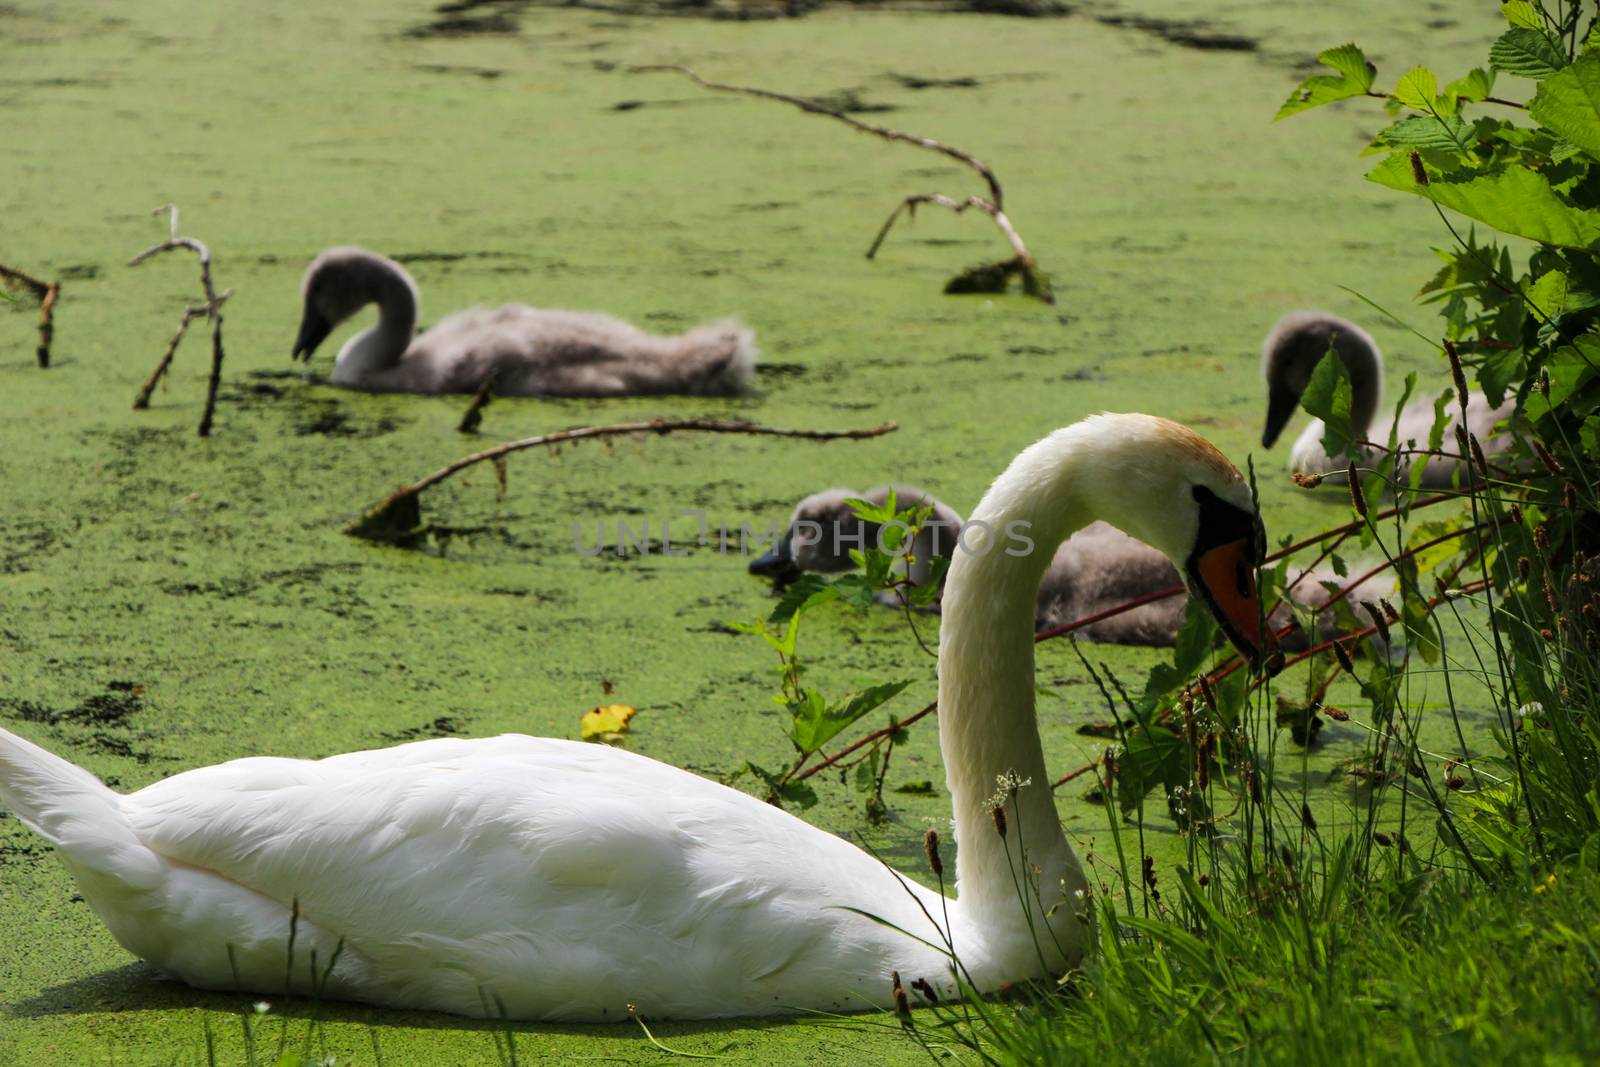 White swan in front of grey swan chicks in lake.